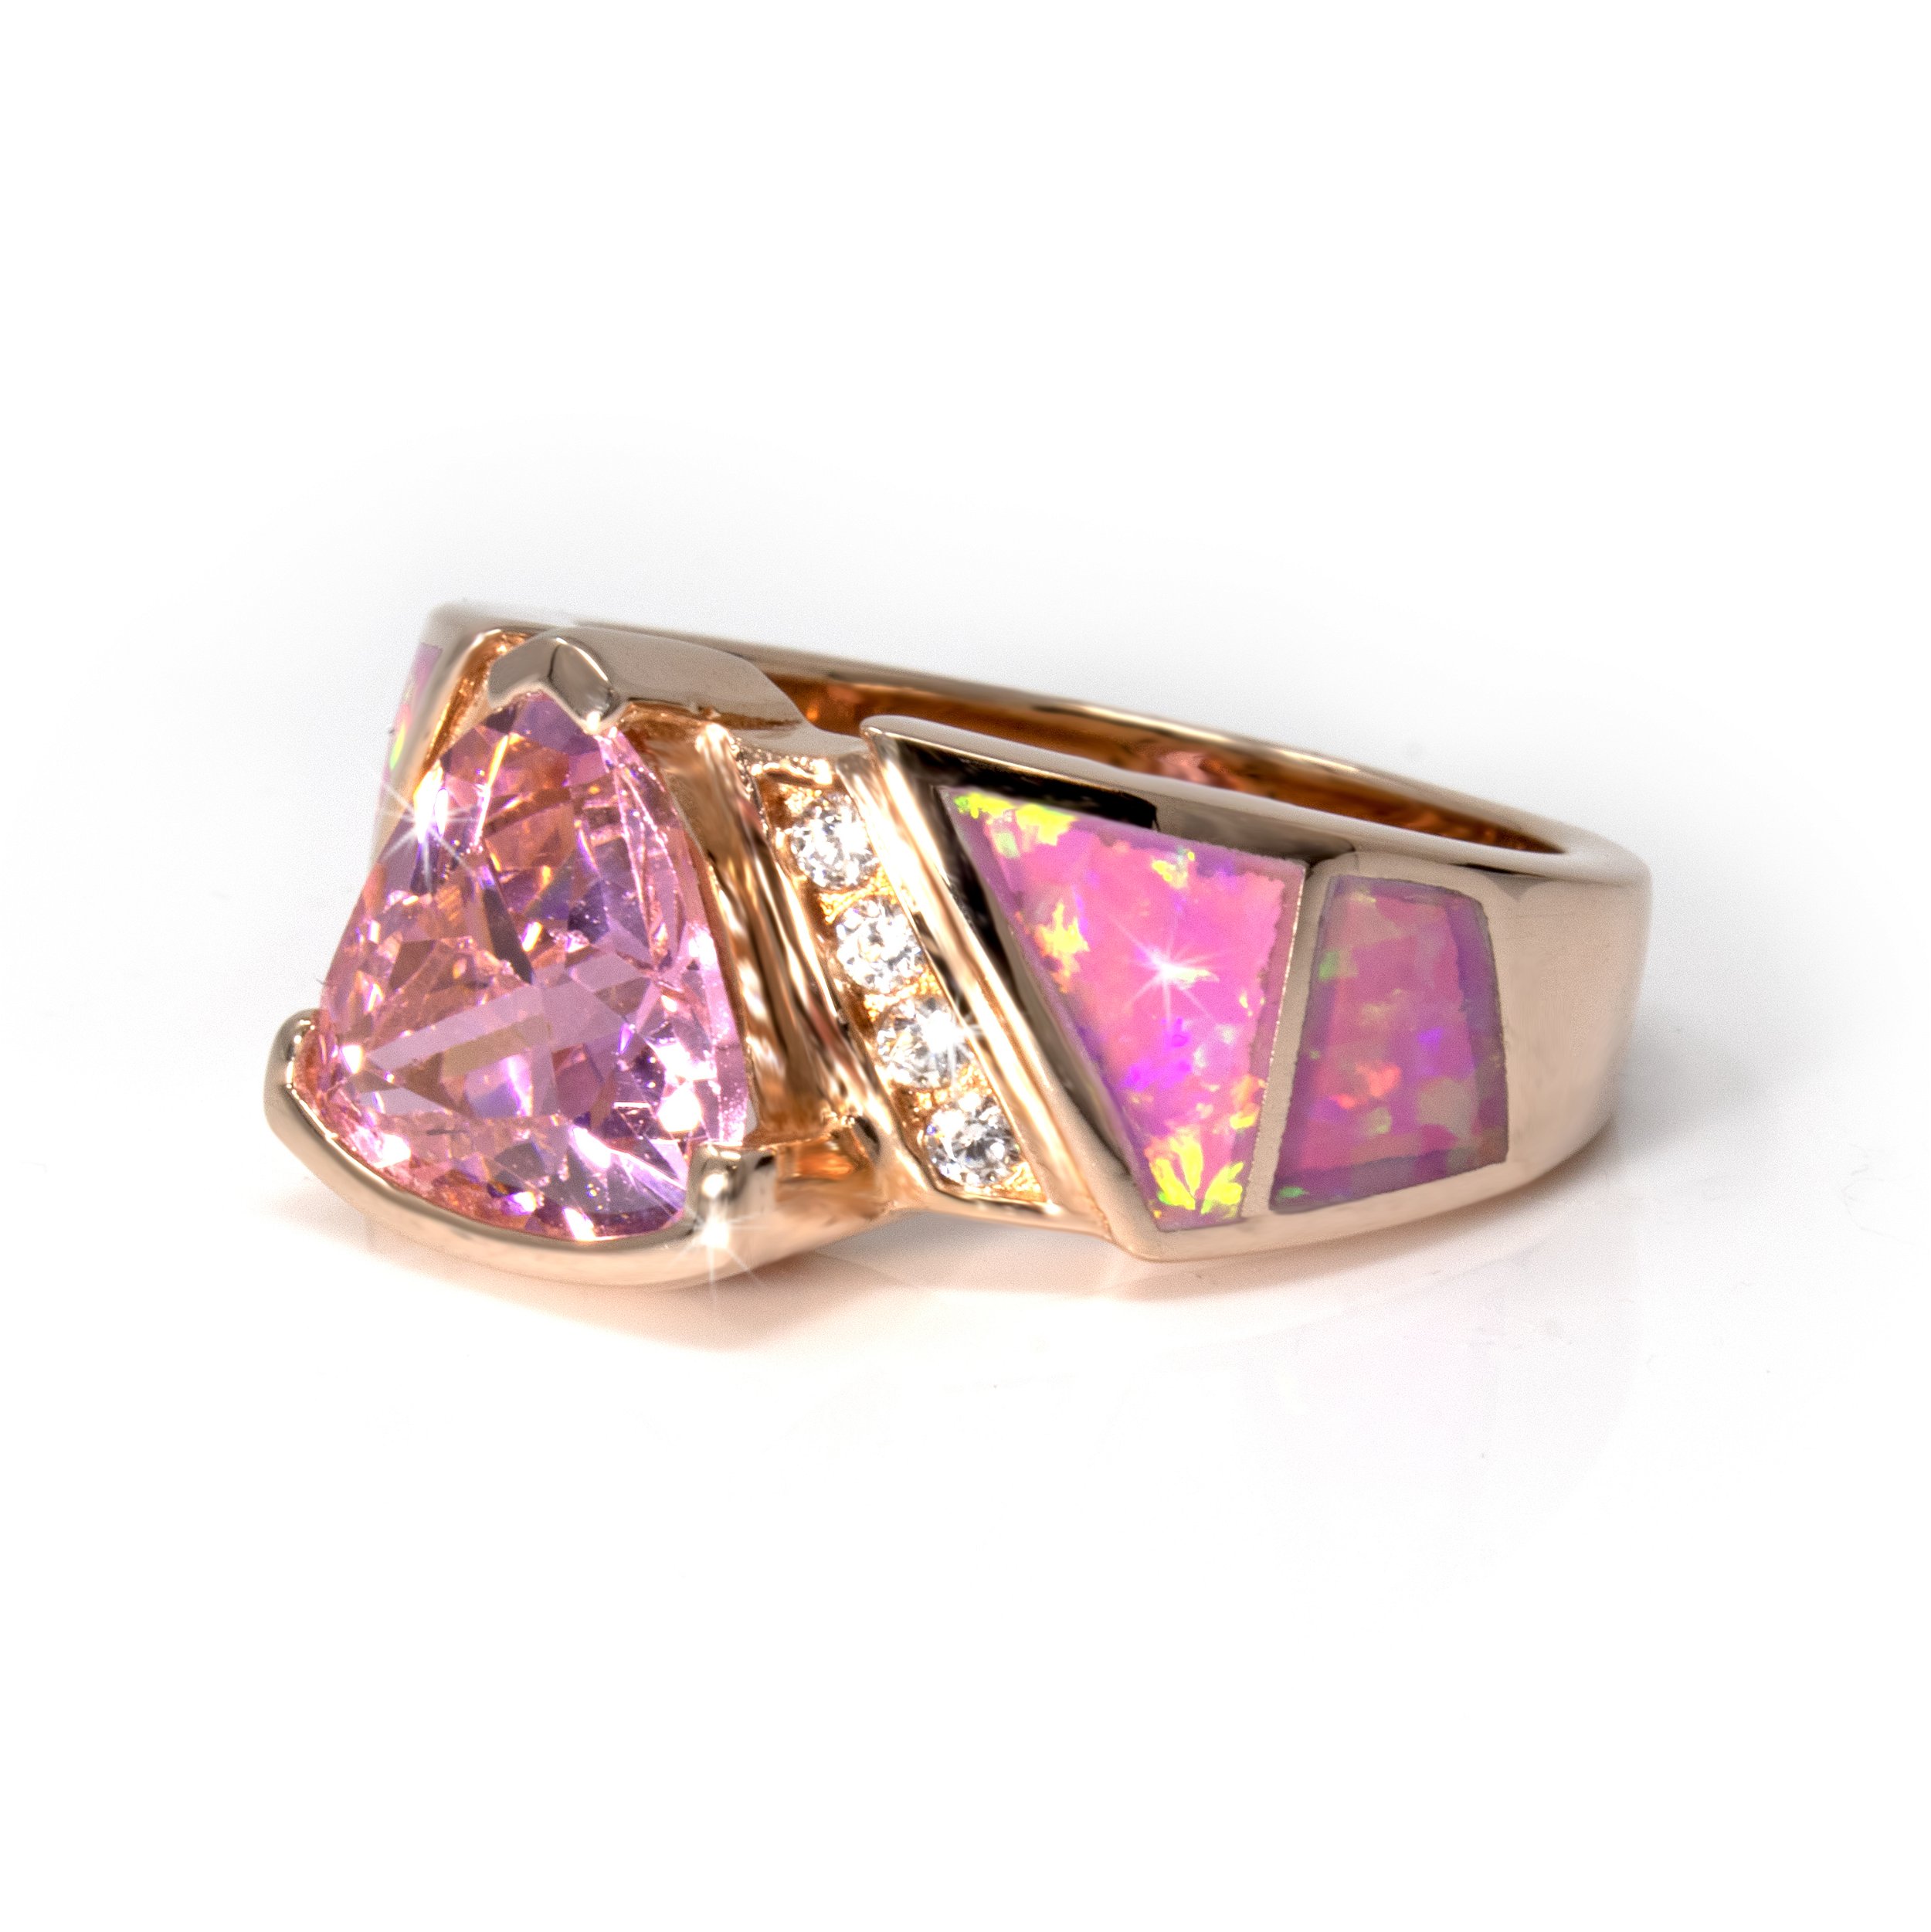 Pink Opal Ring with Rose Gold Overlay Size 9 - Inlaid Top Band With Pink Cz Trillion Set In Raised Sterling Silver Half Bezel & 2 White Cz Trios On Side